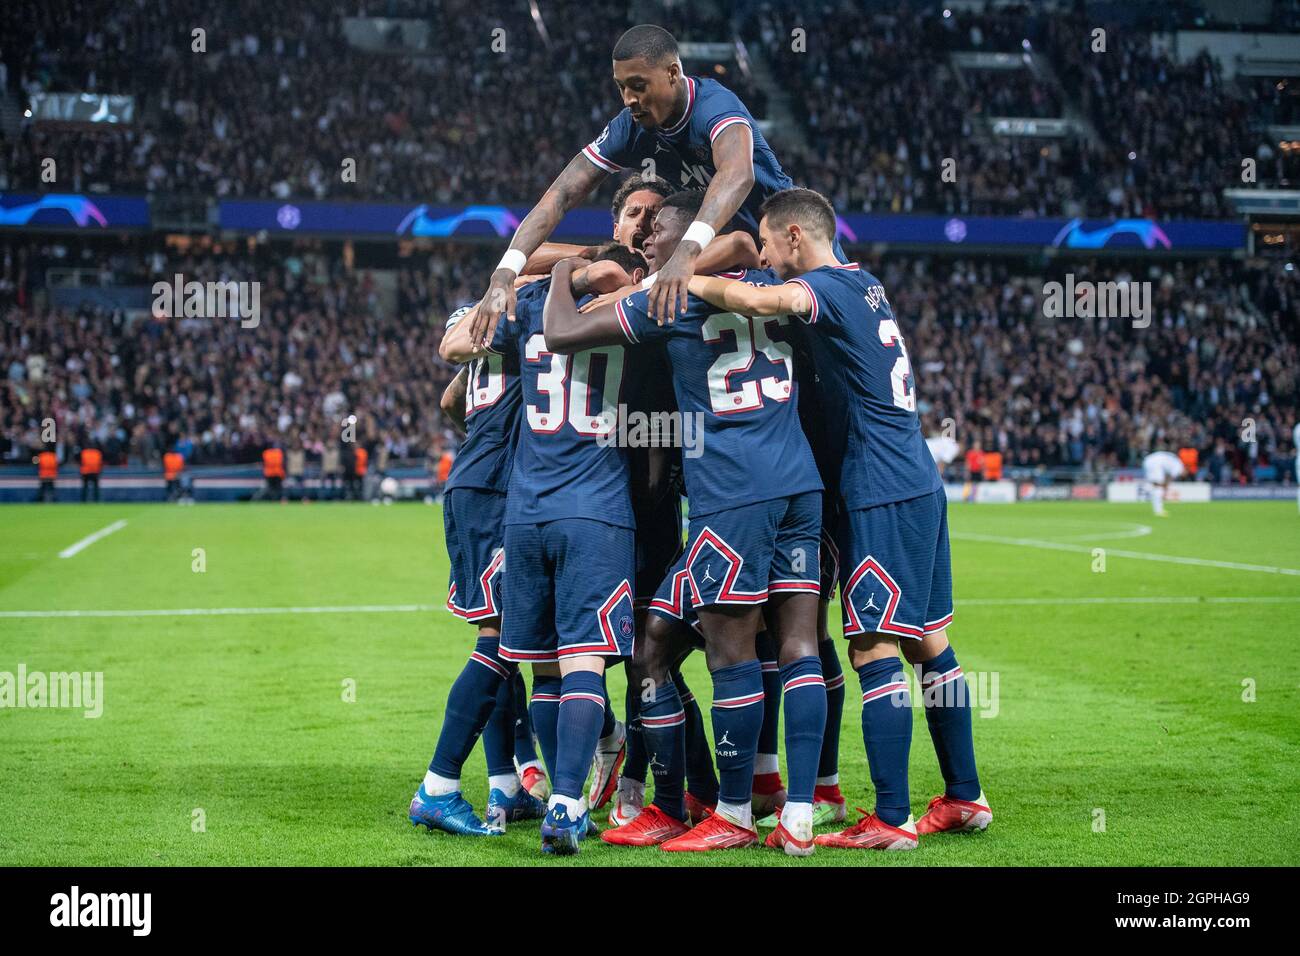 Lionel Messi of Paris Saint-Germain celebrate he’s 1st goal with Presnel Kimpembe, Marquinhos, Kylian Mbappé and Neymar during the UEFA Champions Leag Stock Photo